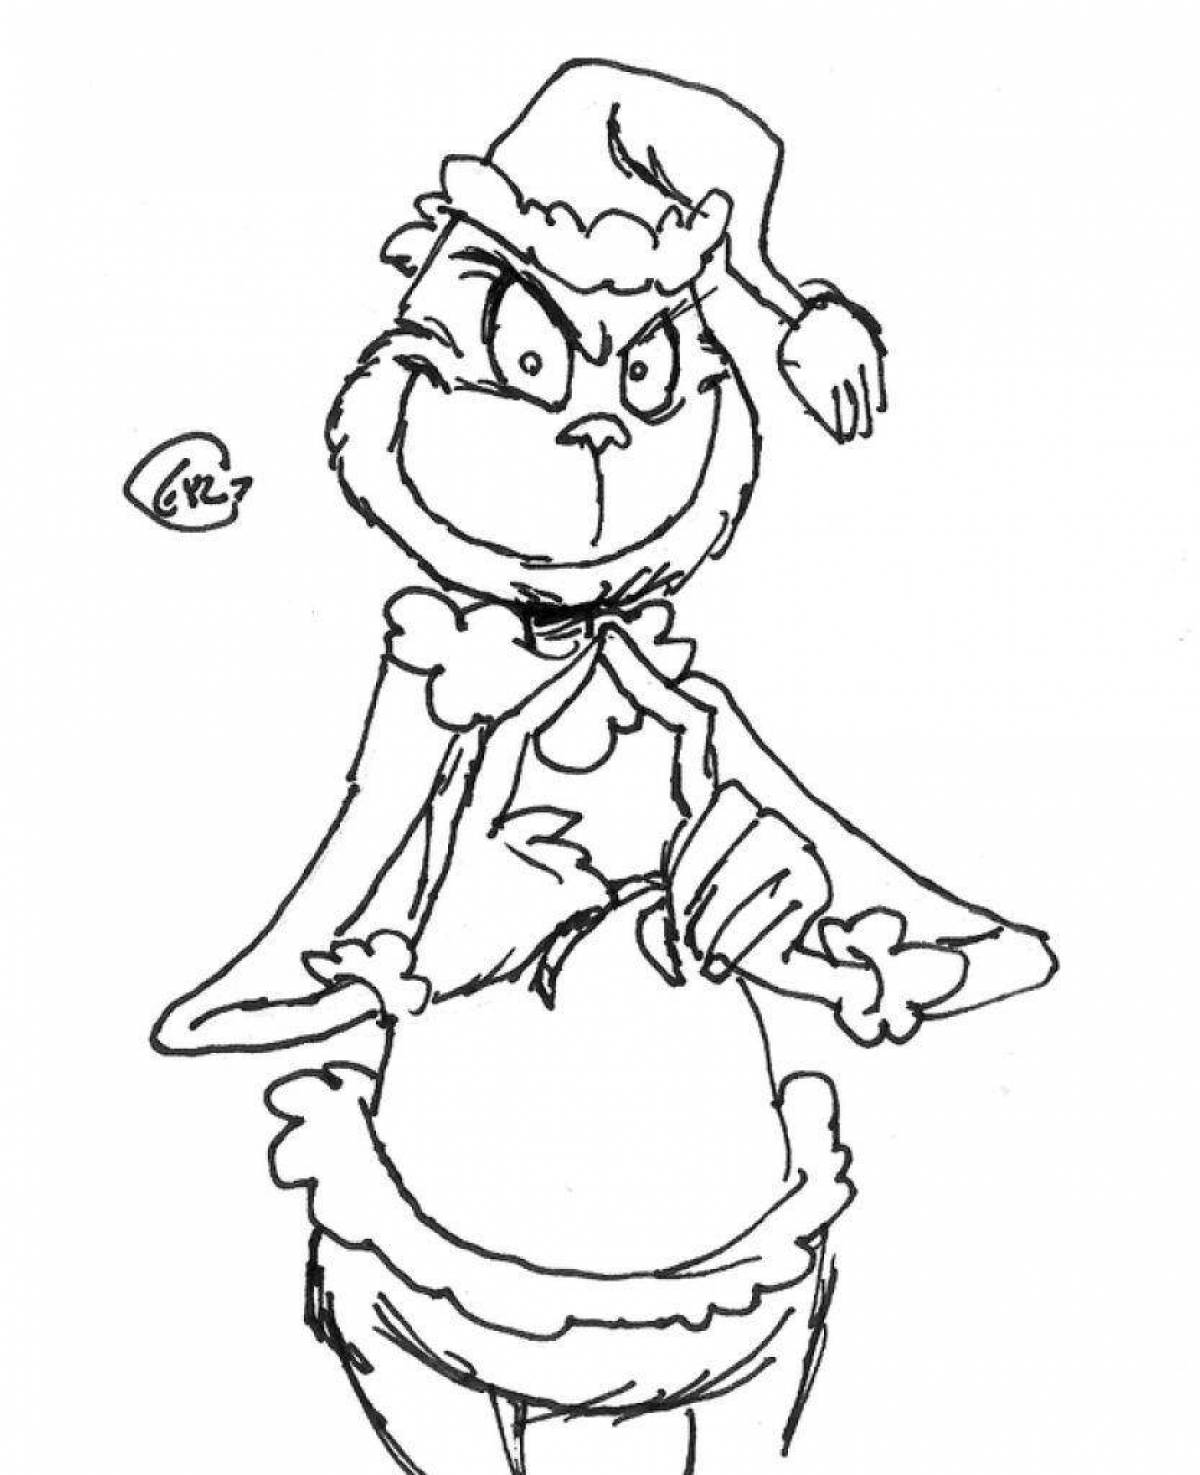 Witty coloring page grinch drawing